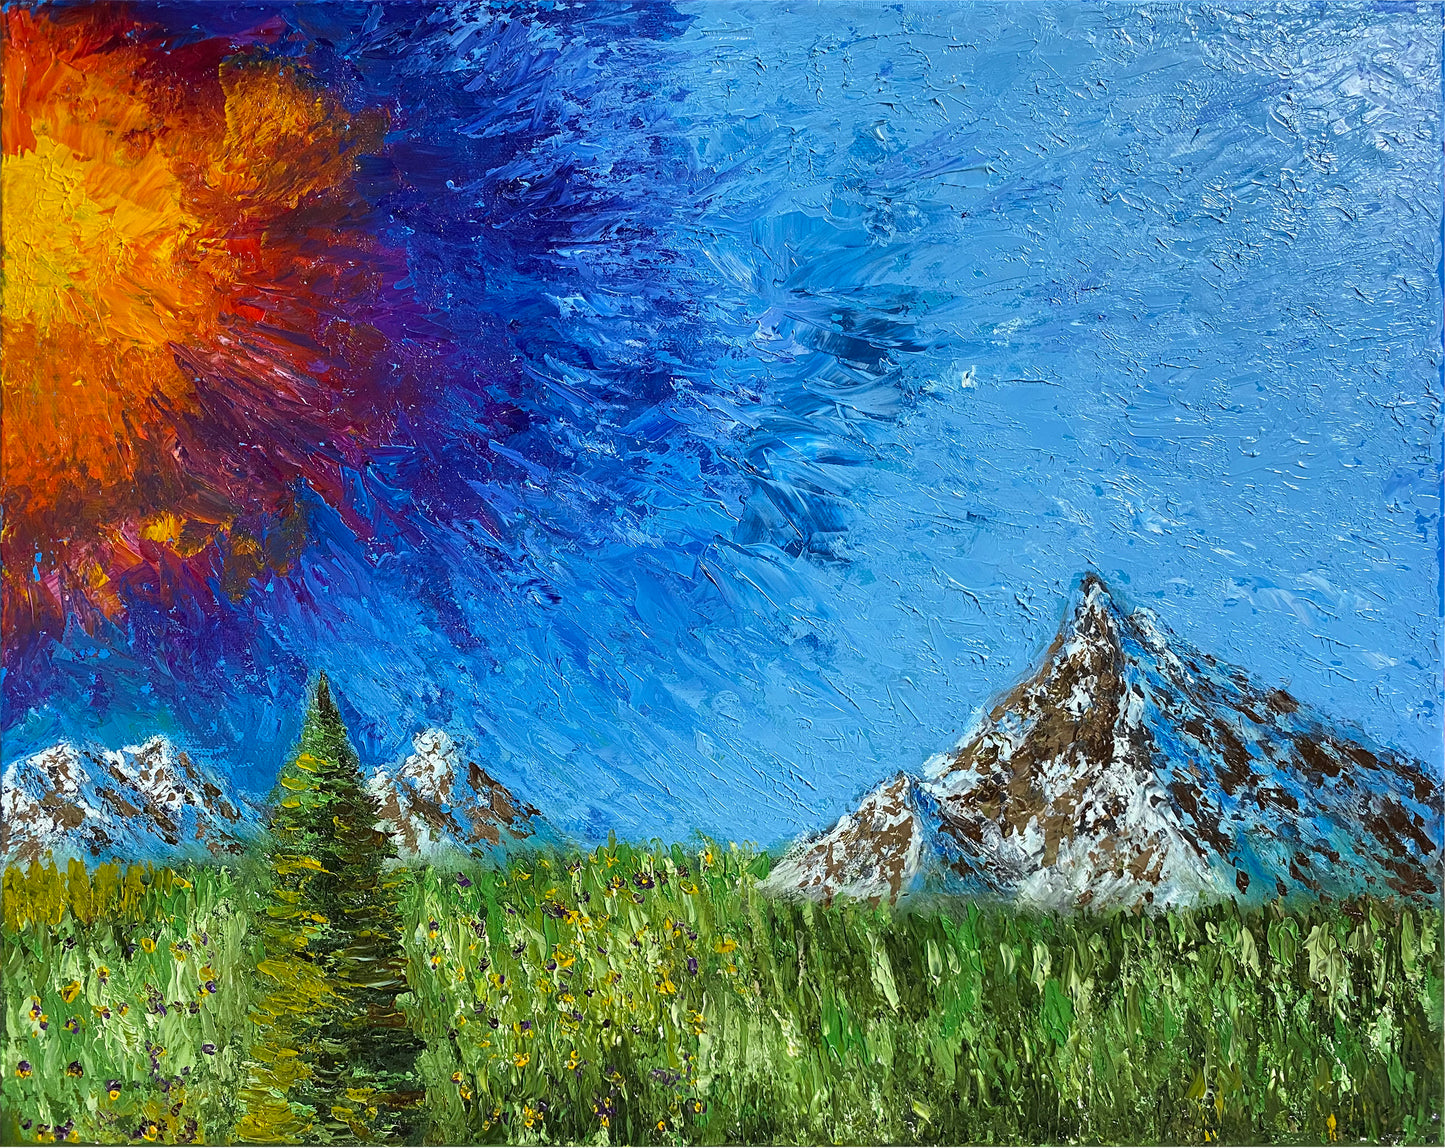 Abstract Sun & Mountains Original Oil Painting